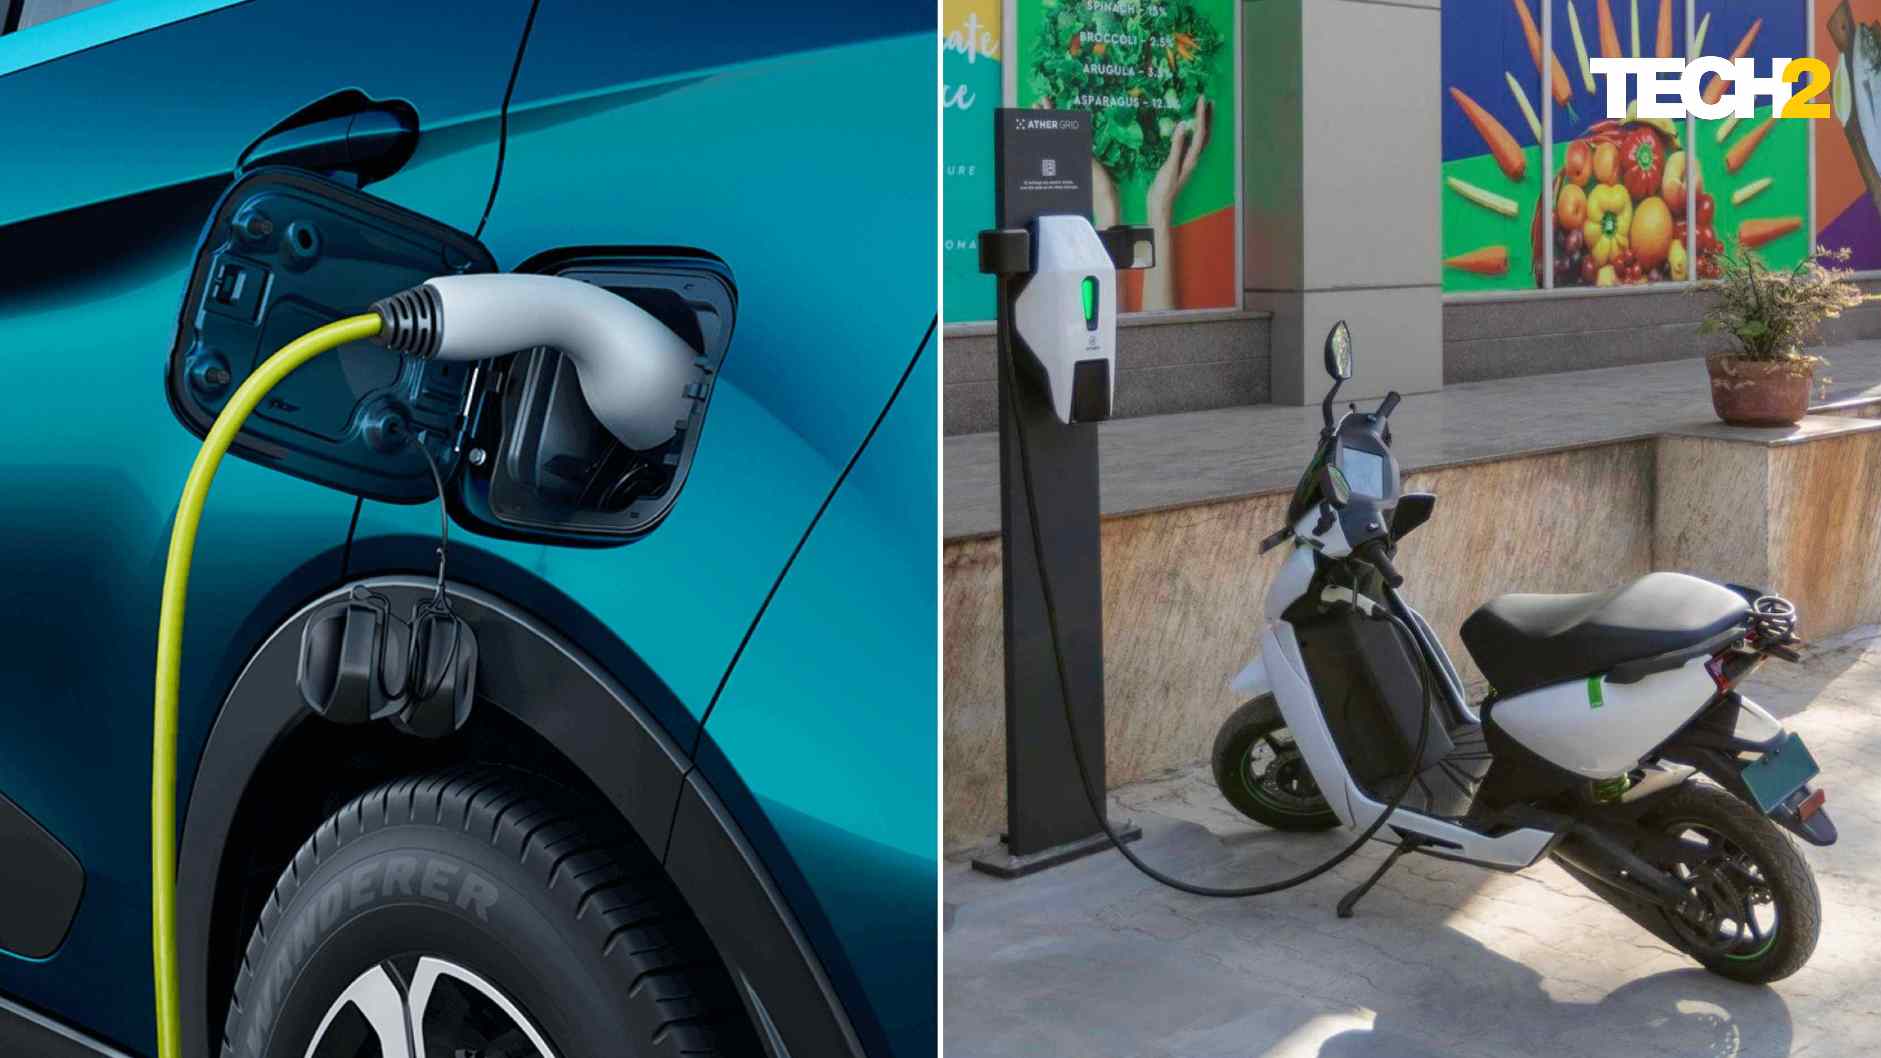 maharashtra ev policy 2021 explained: subsidy increased, prices of evs to fall sharply- technology news, firstpost